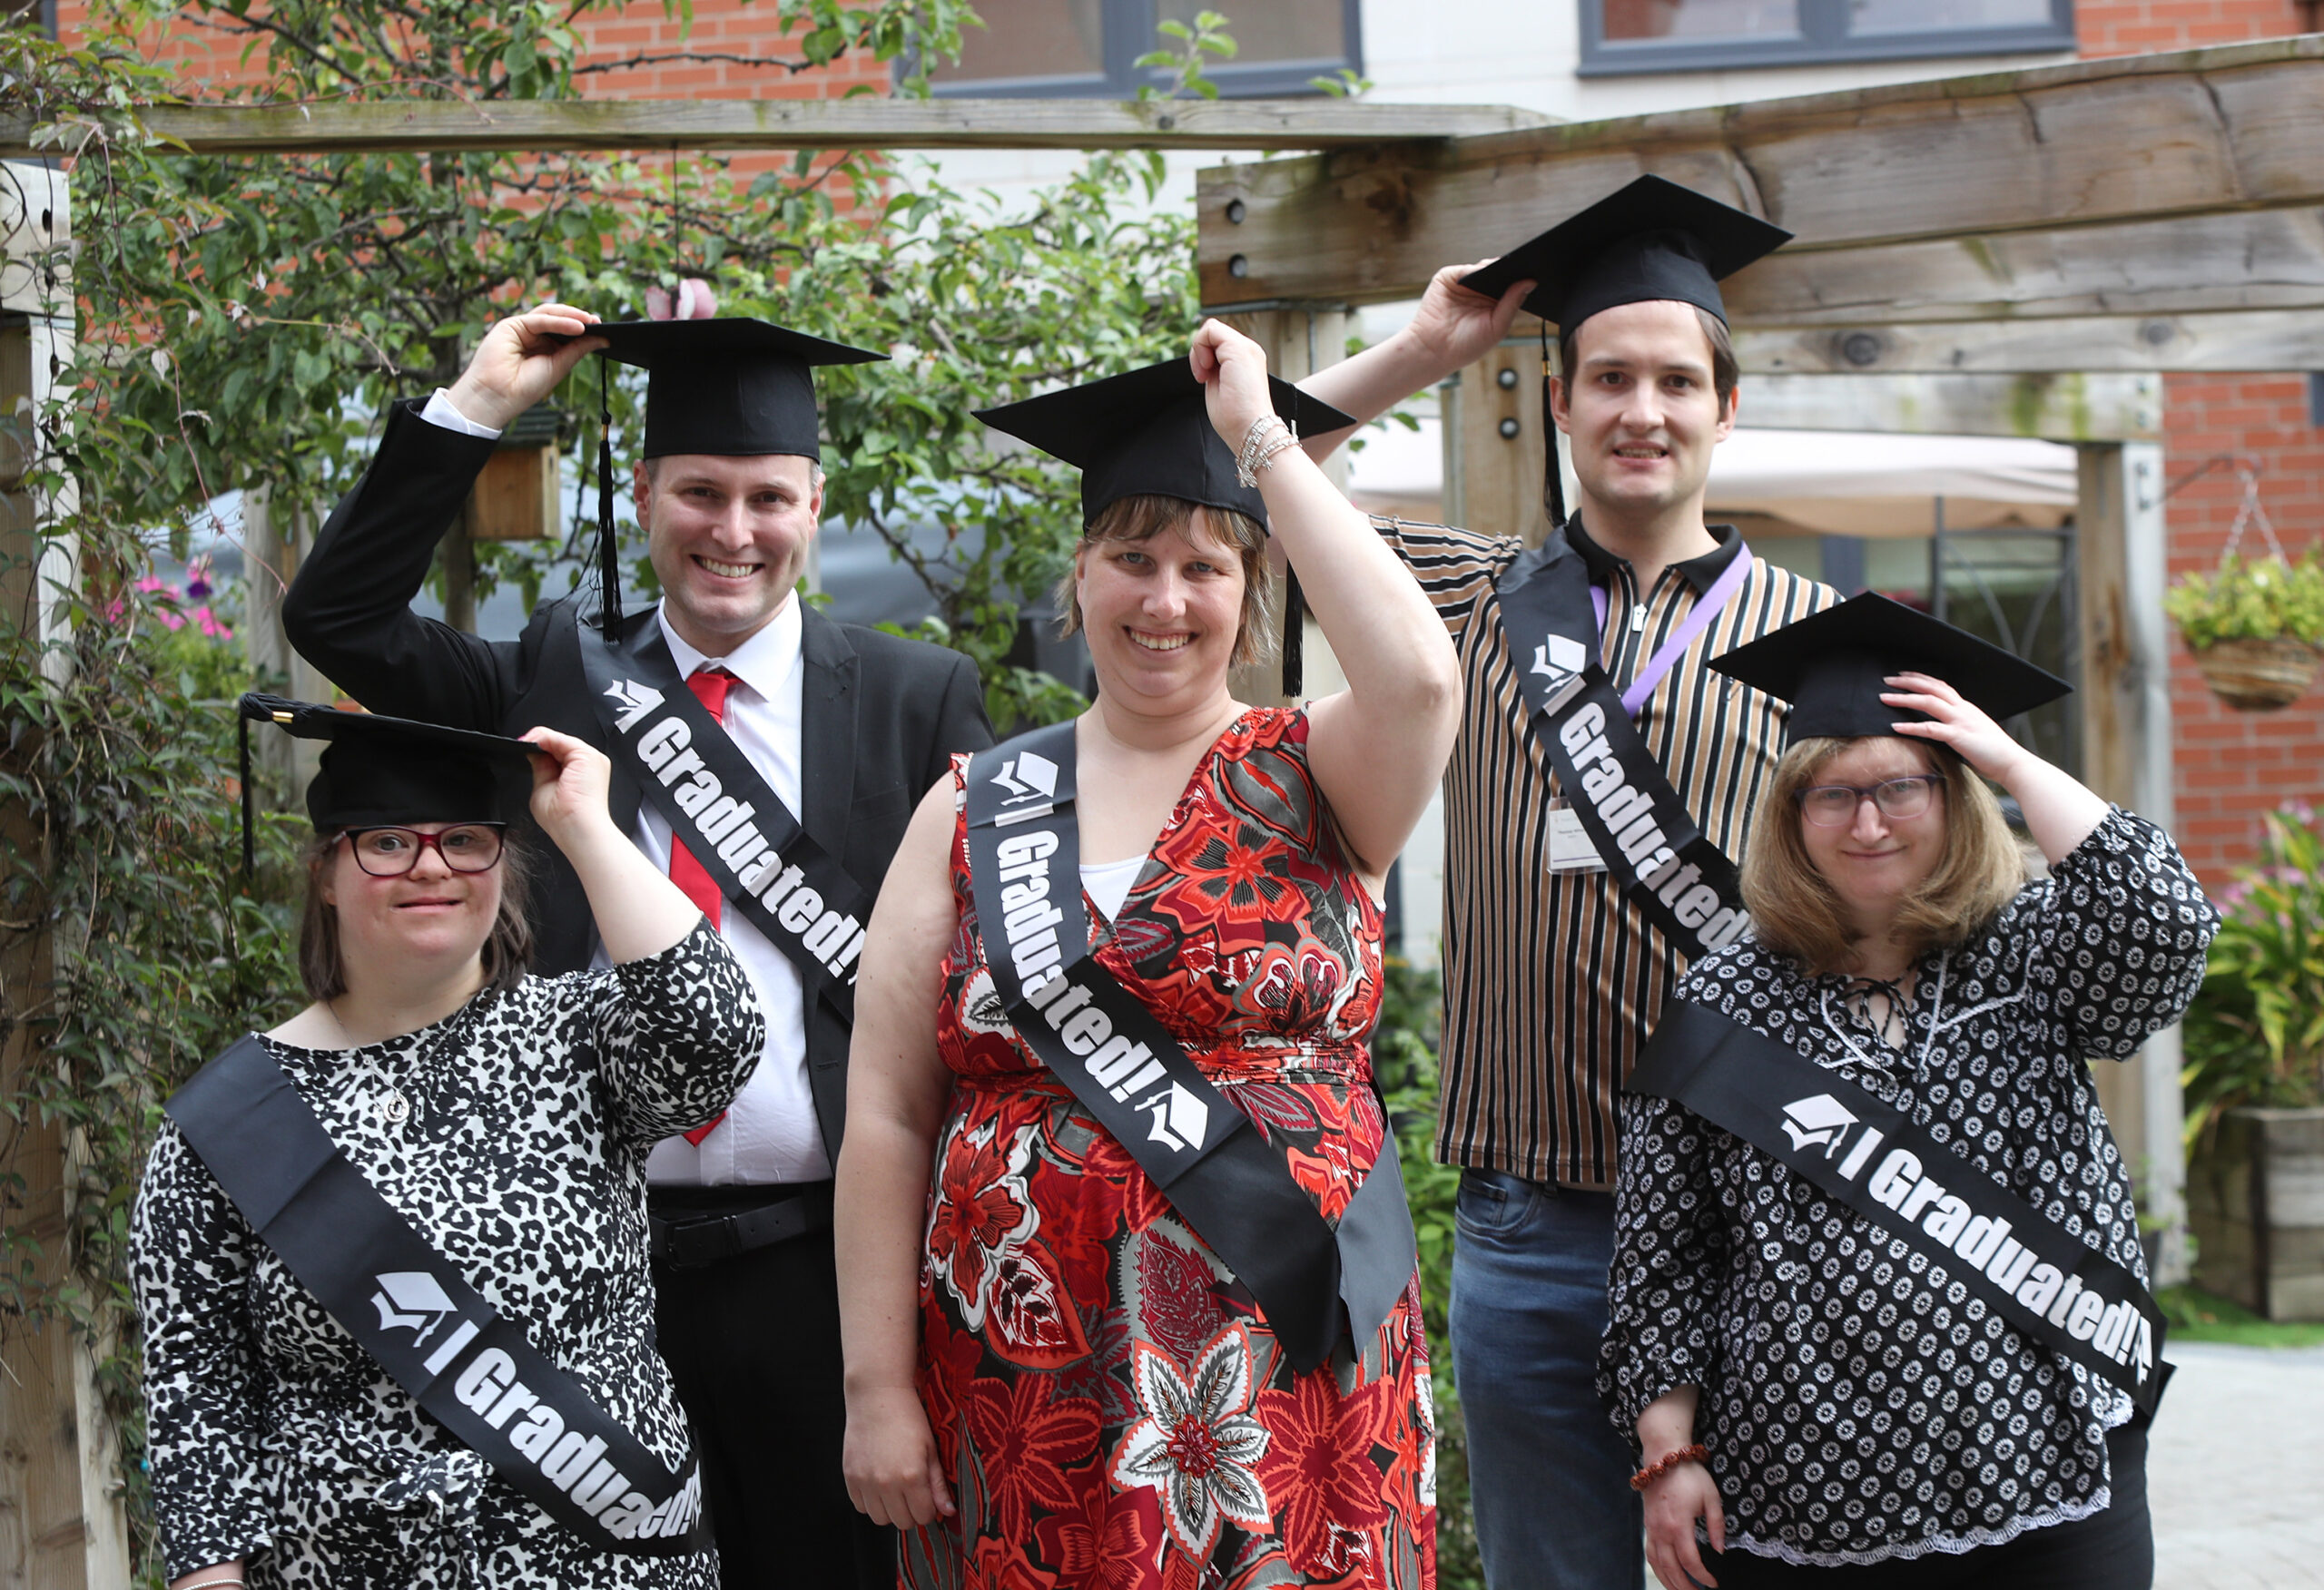 Talented young adults with learning disabilities celebrate graduating from a lifechanging transition